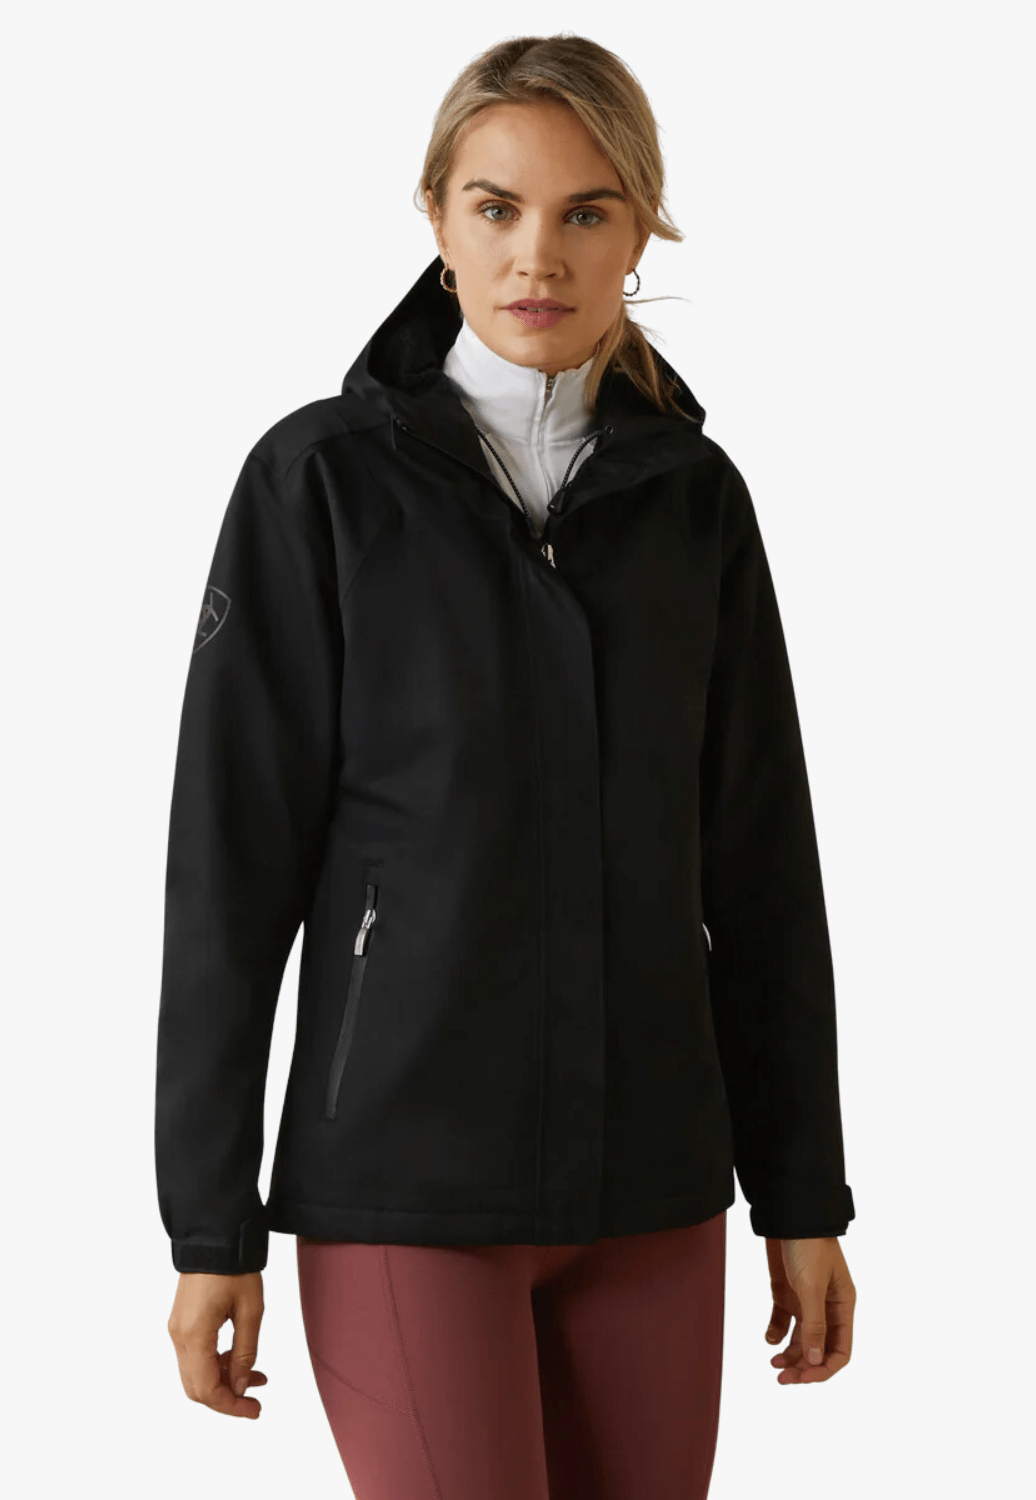 Ariat CLOTHING-Womens Jackets Ariat Womens Spectator H20 Jacket